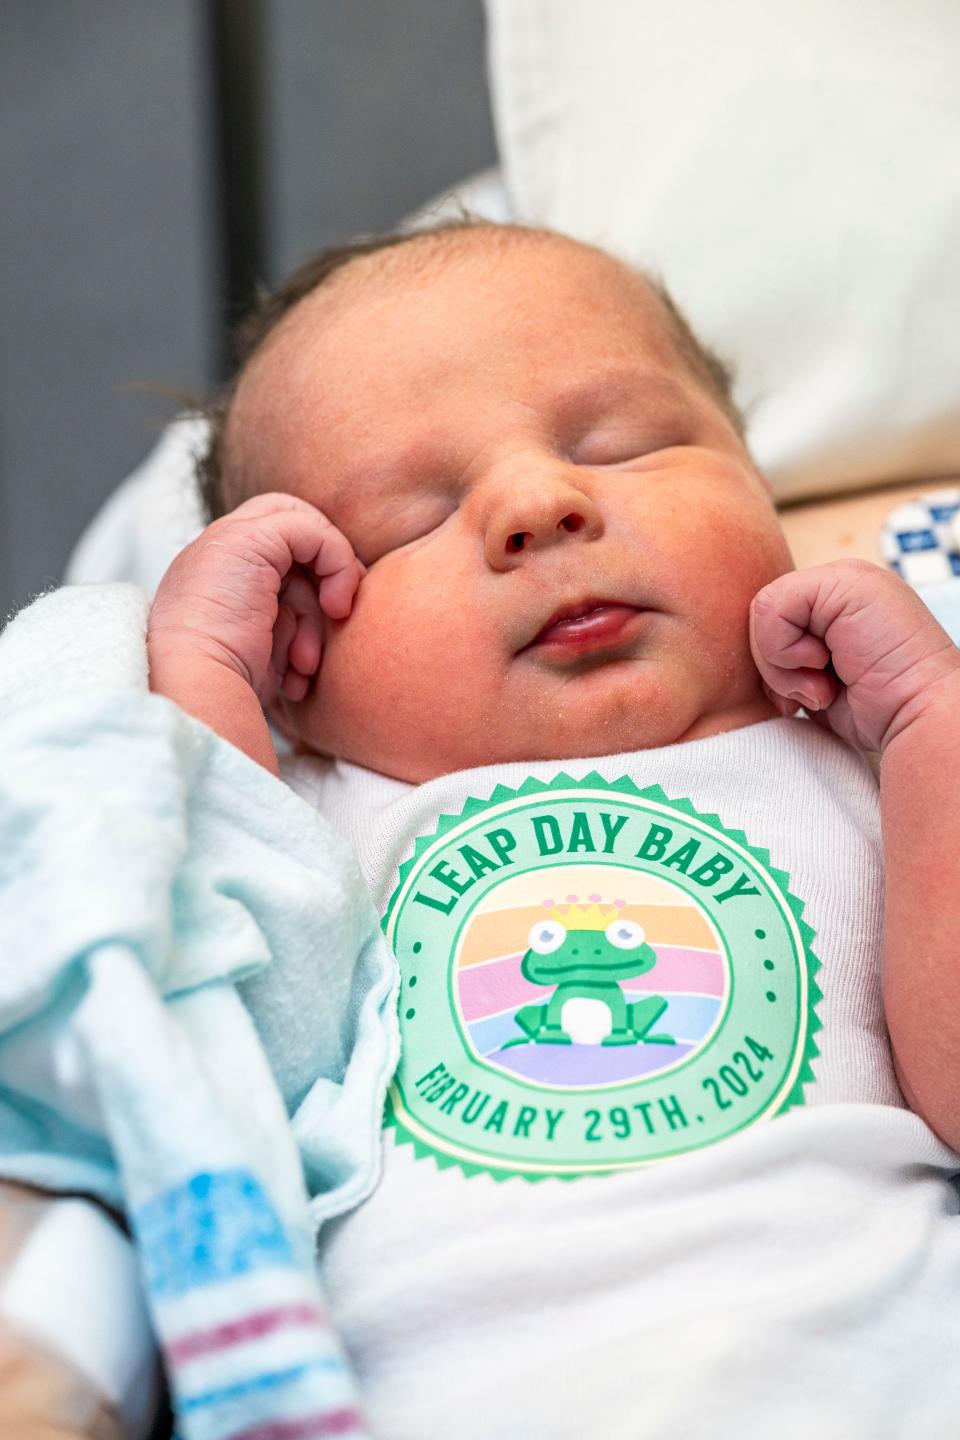 A baby boy born at Cleveland Clinic Akron General on leap day sports one of the special onesies made for the occasion by one of the hospital's staff.